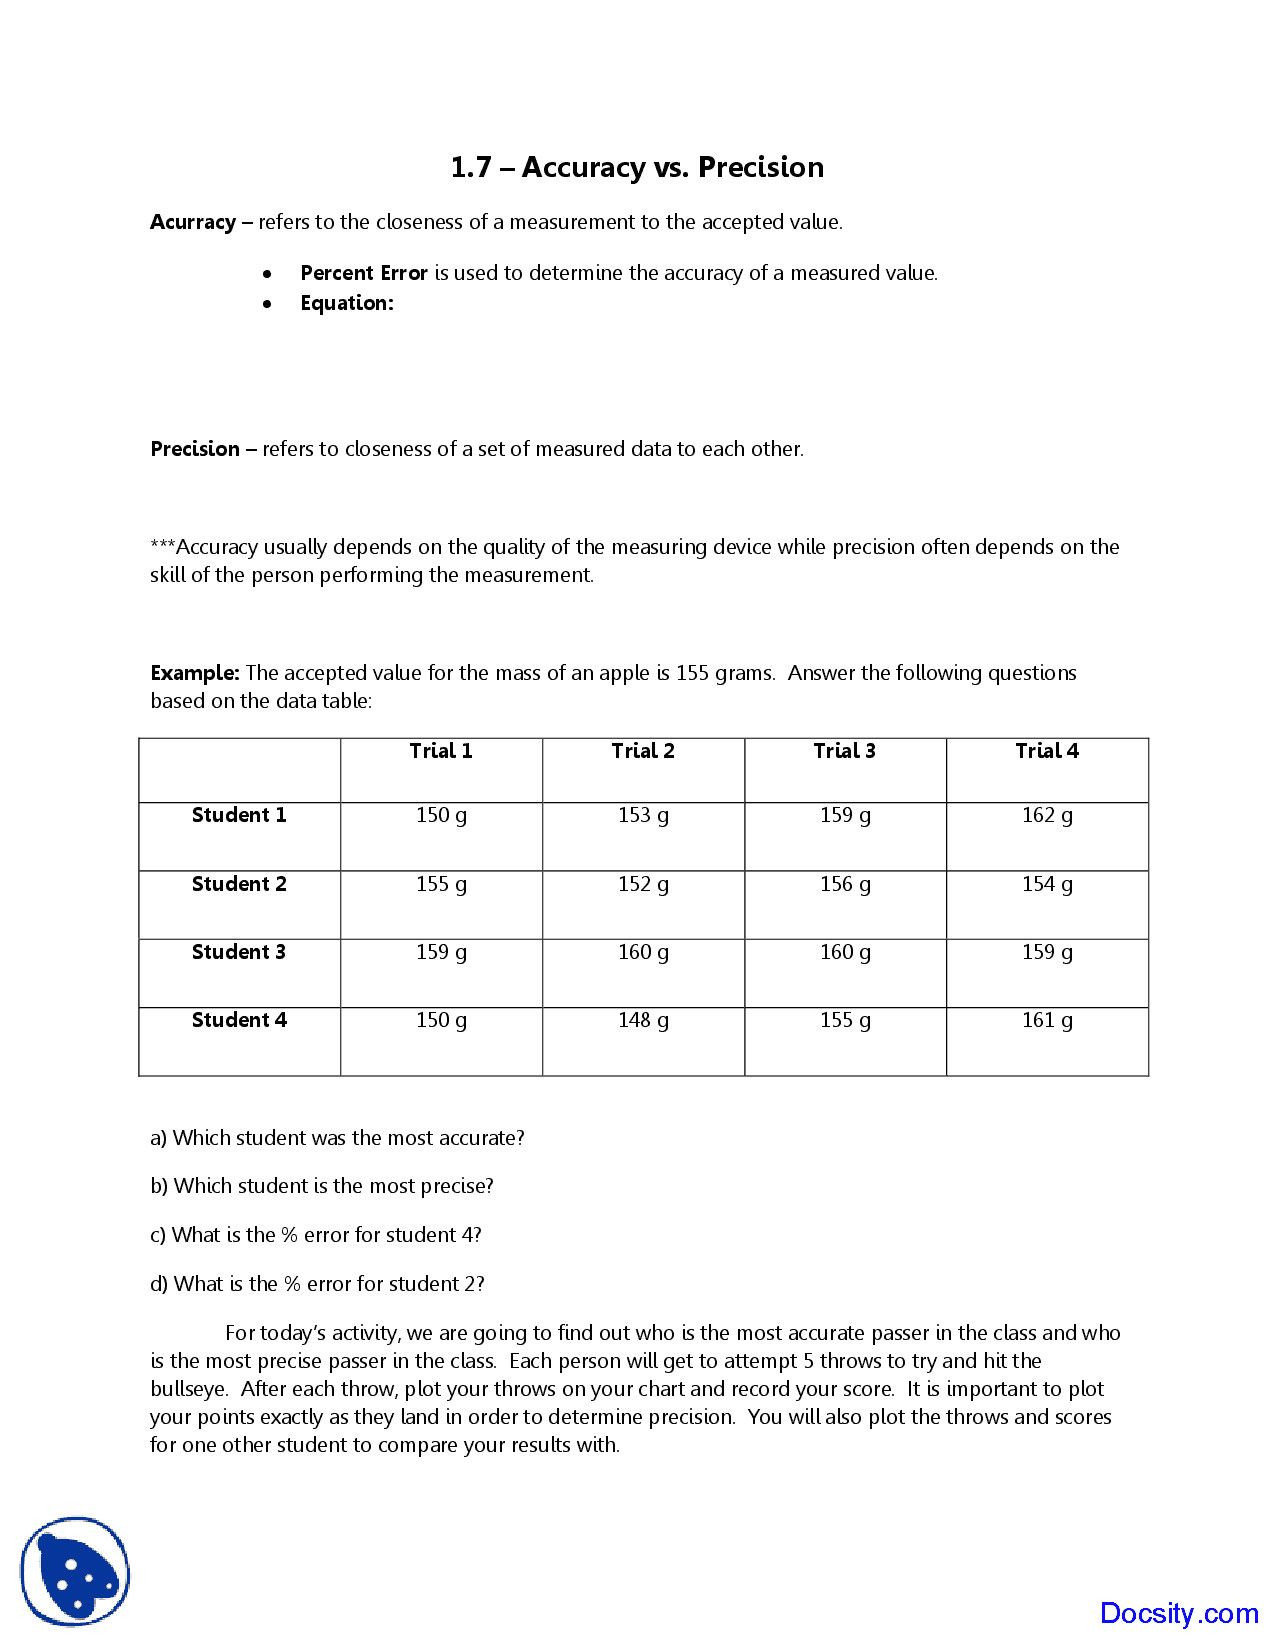 Accuracy and Precision Worksheet Inspiring Accuracy and Precision Worksheet Answers